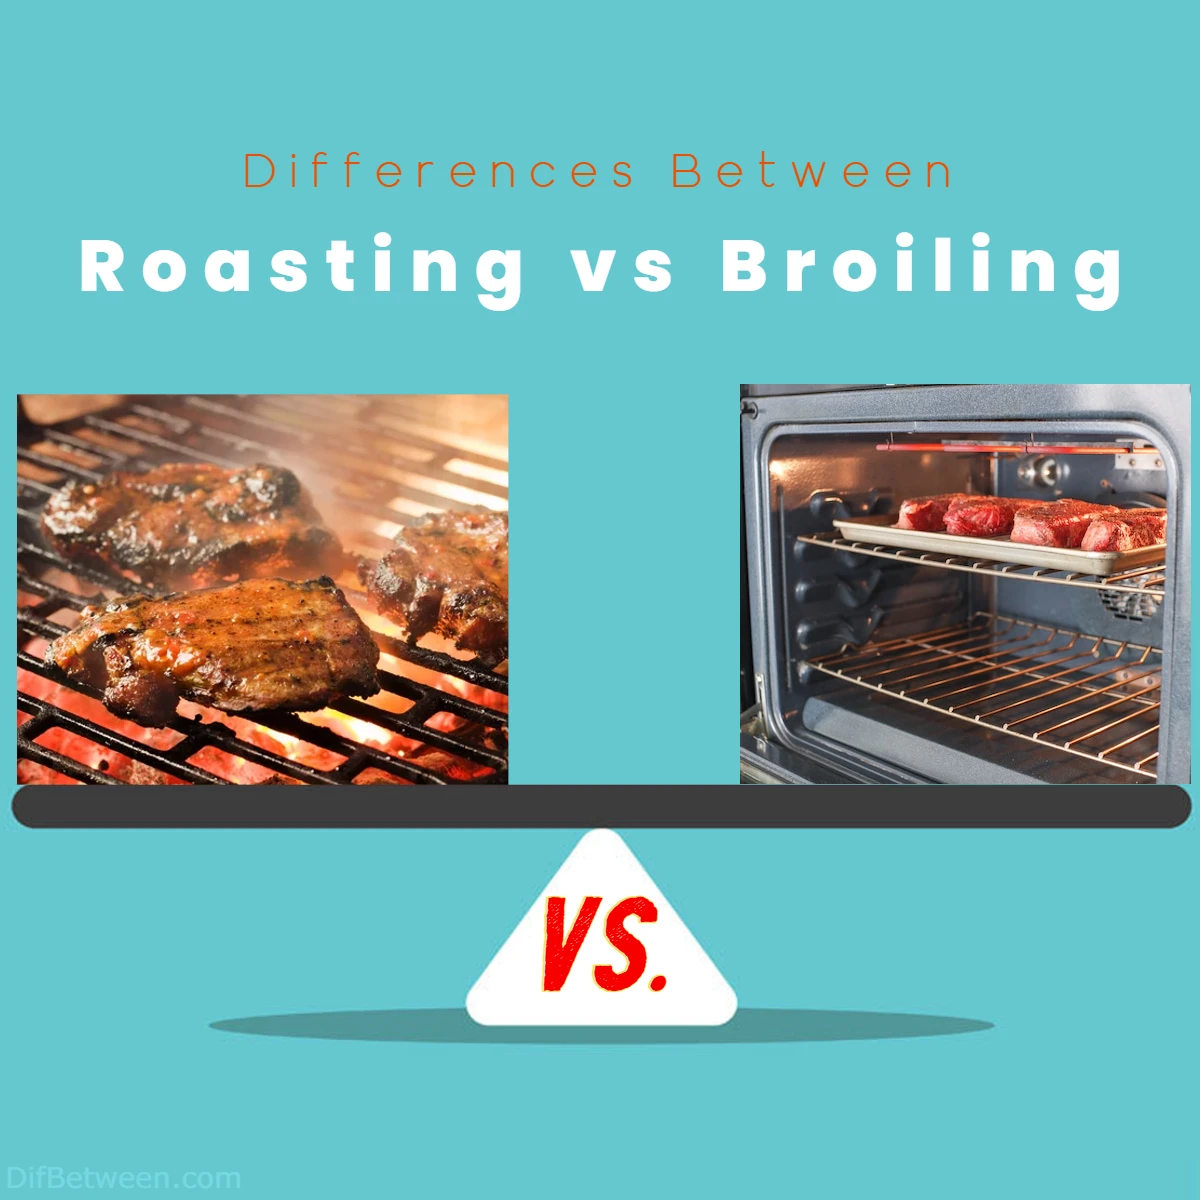 Differences Between Broiling and Roasting